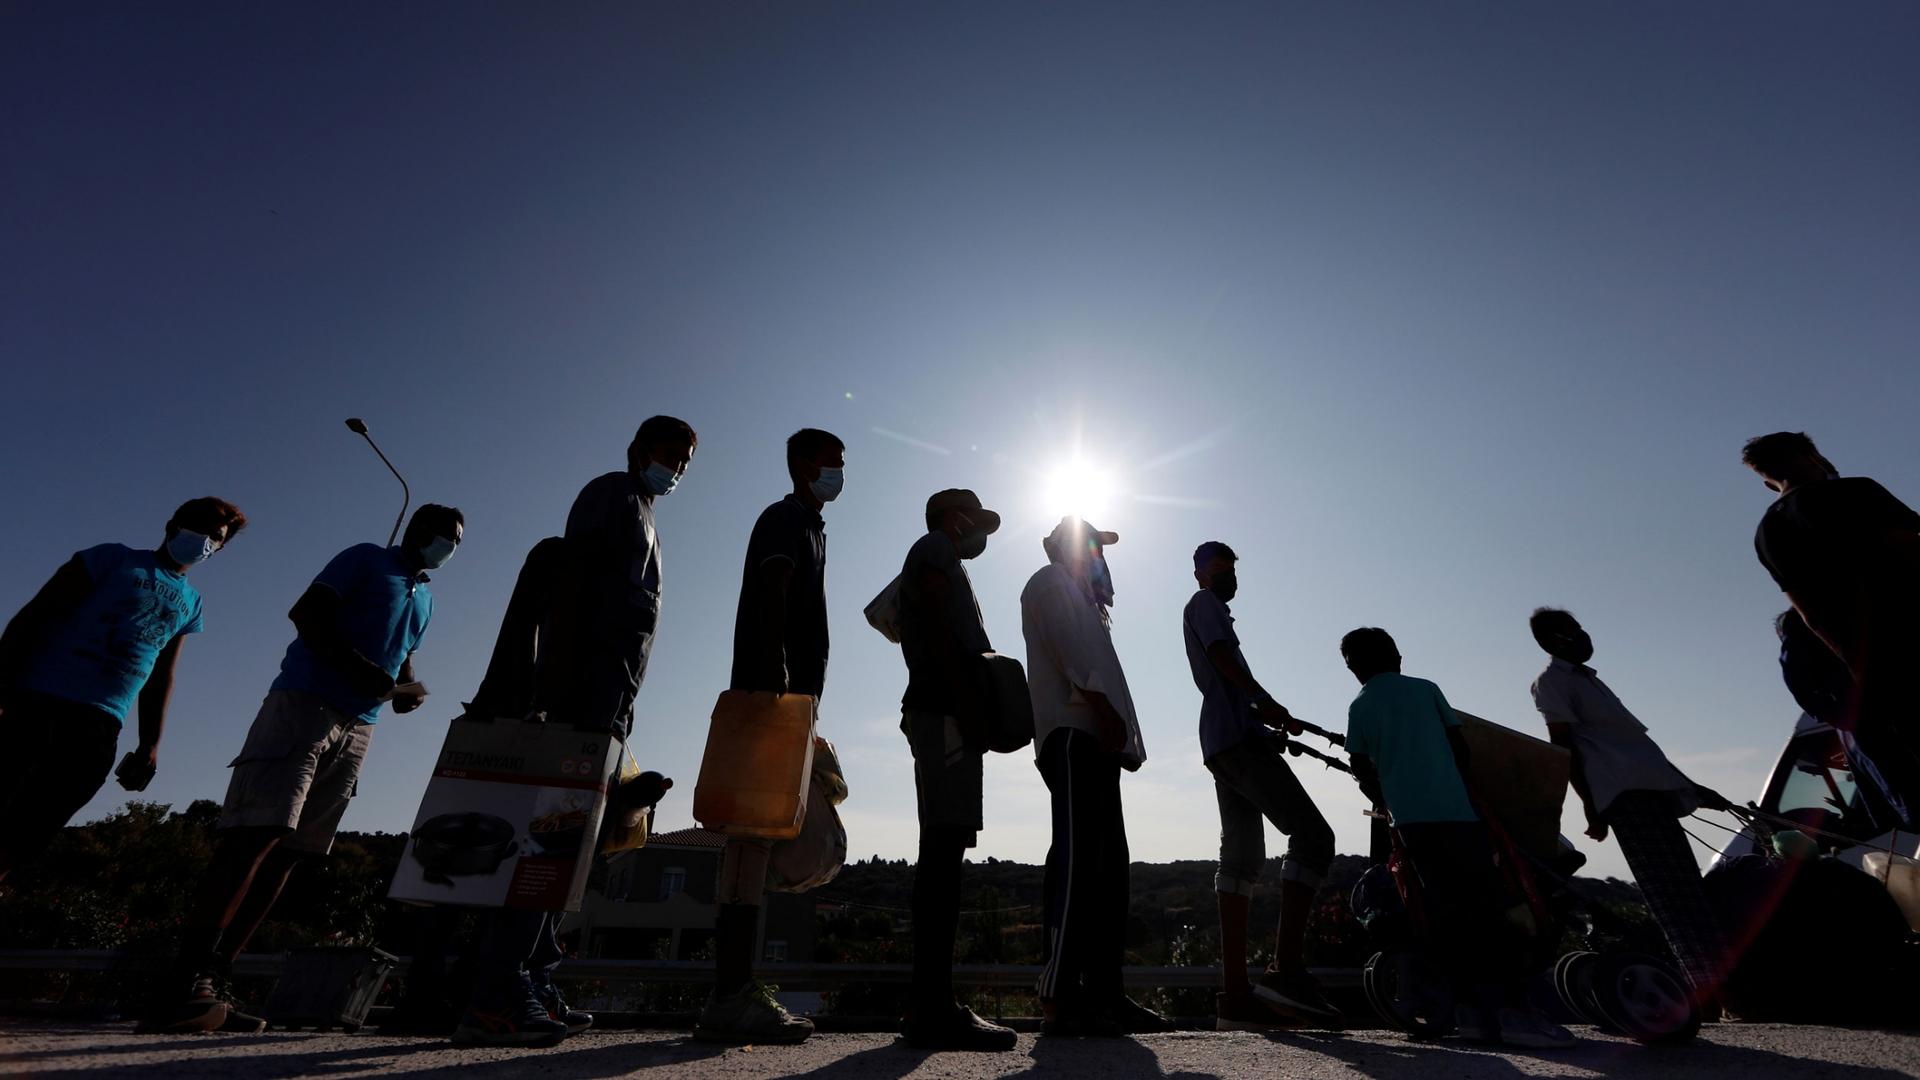 Refugees and migrants are shown in shadow standing in a lin carrying various belongings with the sun flaring in the distance.